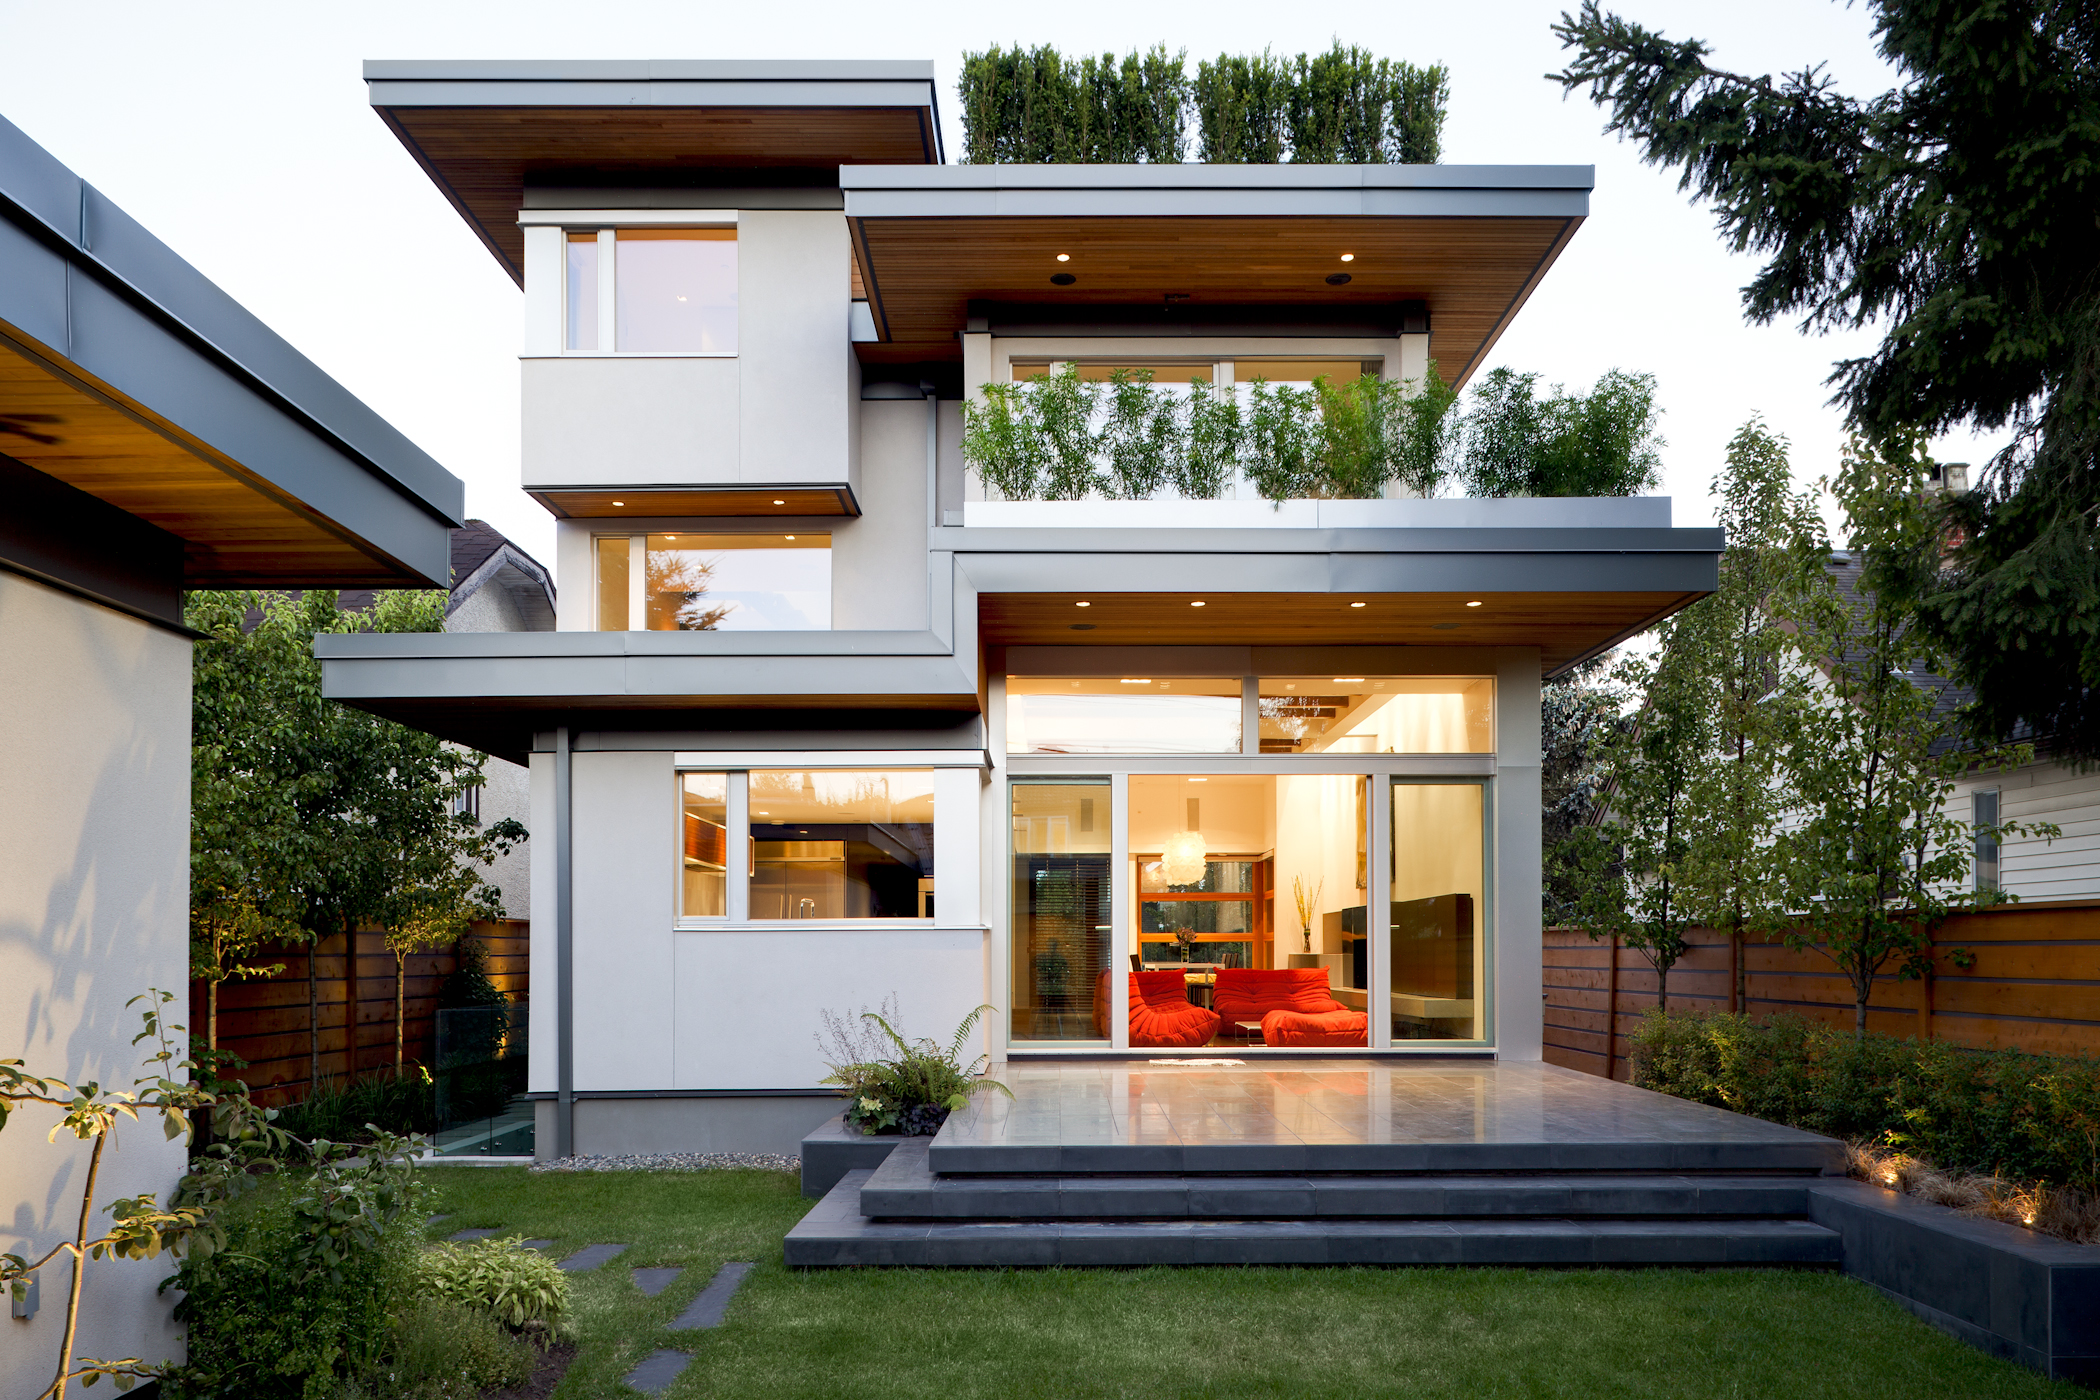 Back view of a sustainable house with a modern design in Vancouver.